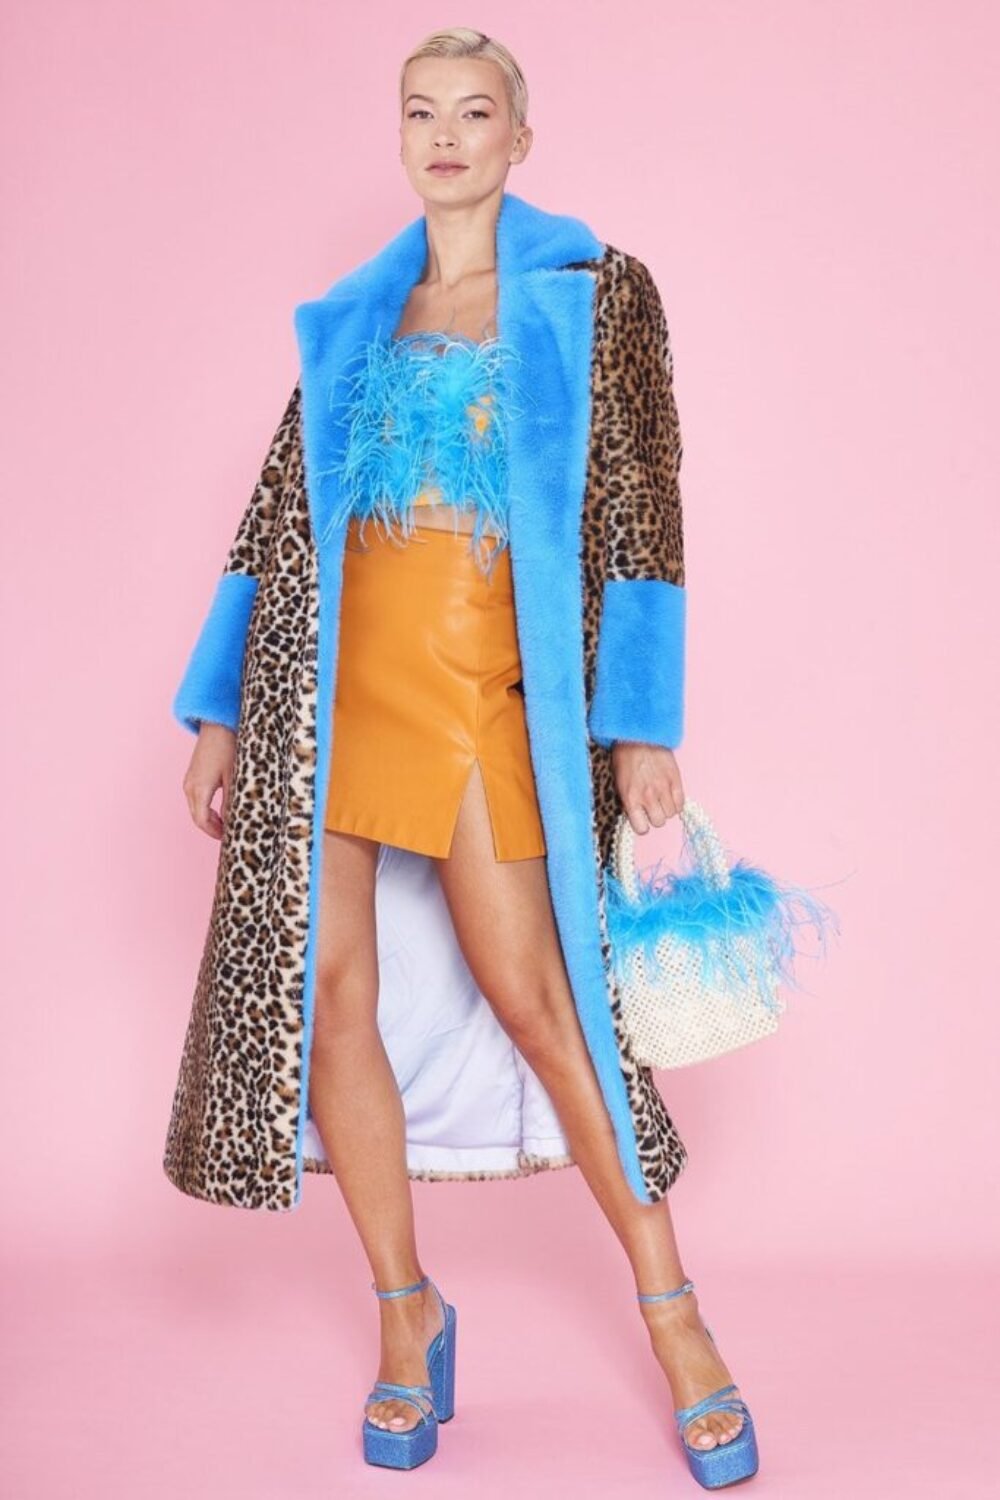 Shop Lux Animal Print Faux Fur Maxi Coat with Clashing Blue Cuffs and Collar and women's luxury and designer clothes at www.lux-apparel.co.uk